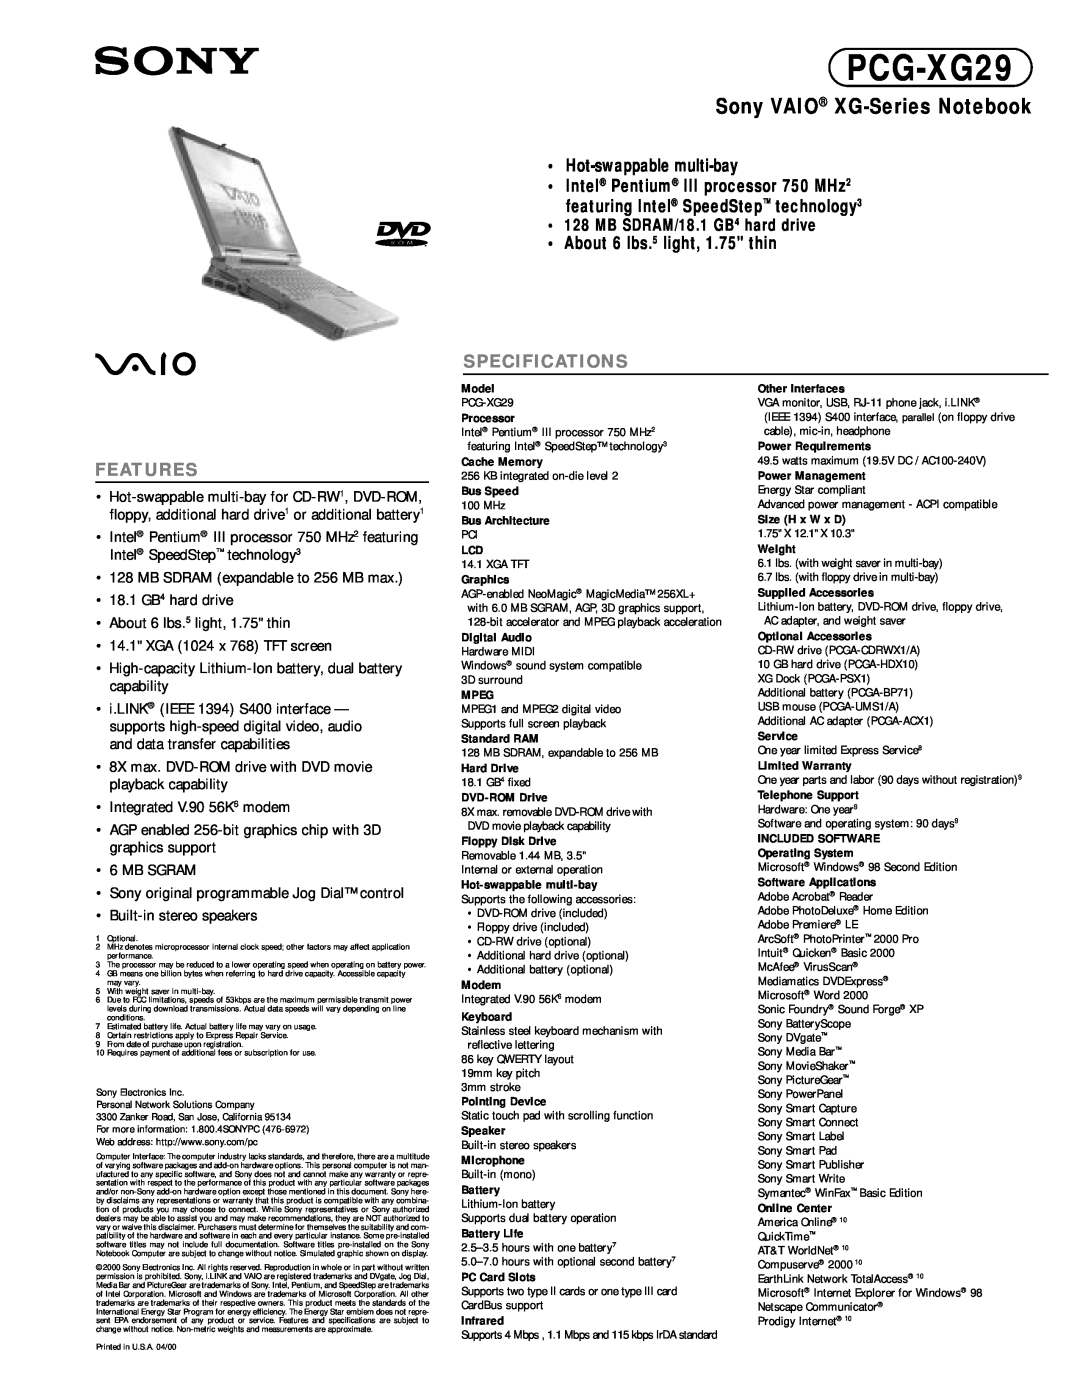 Sony PCG-XG29 specifications Sony VAIO XG-Series Notebook, Features, Hot-swappable multi-bay, Specifications 